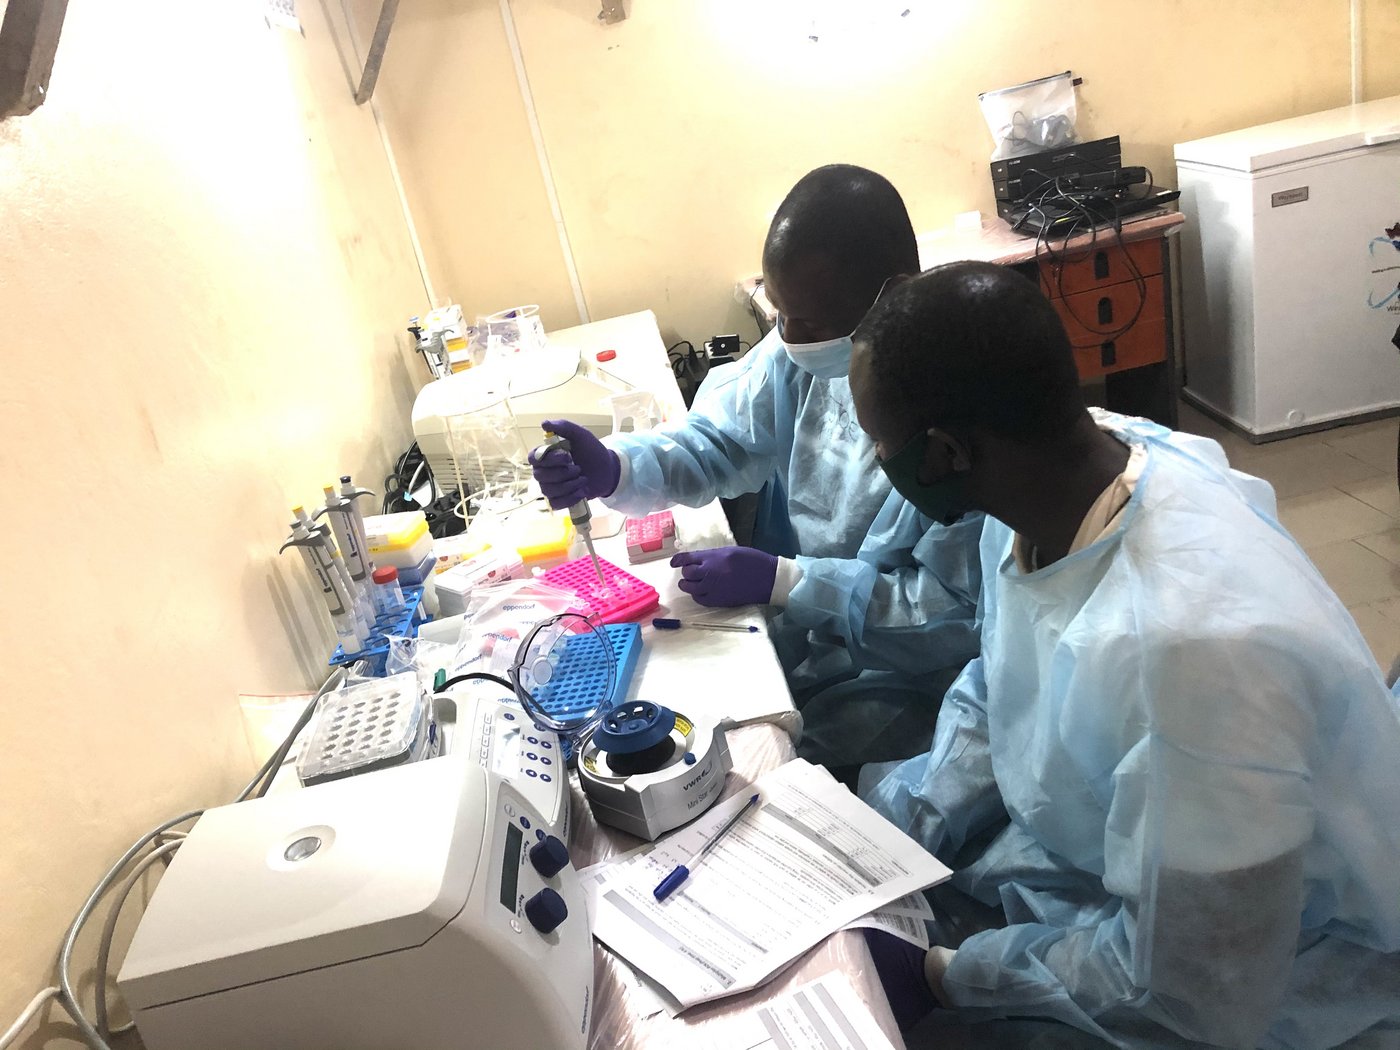 The picture shows two African researchers in a laboratory situation